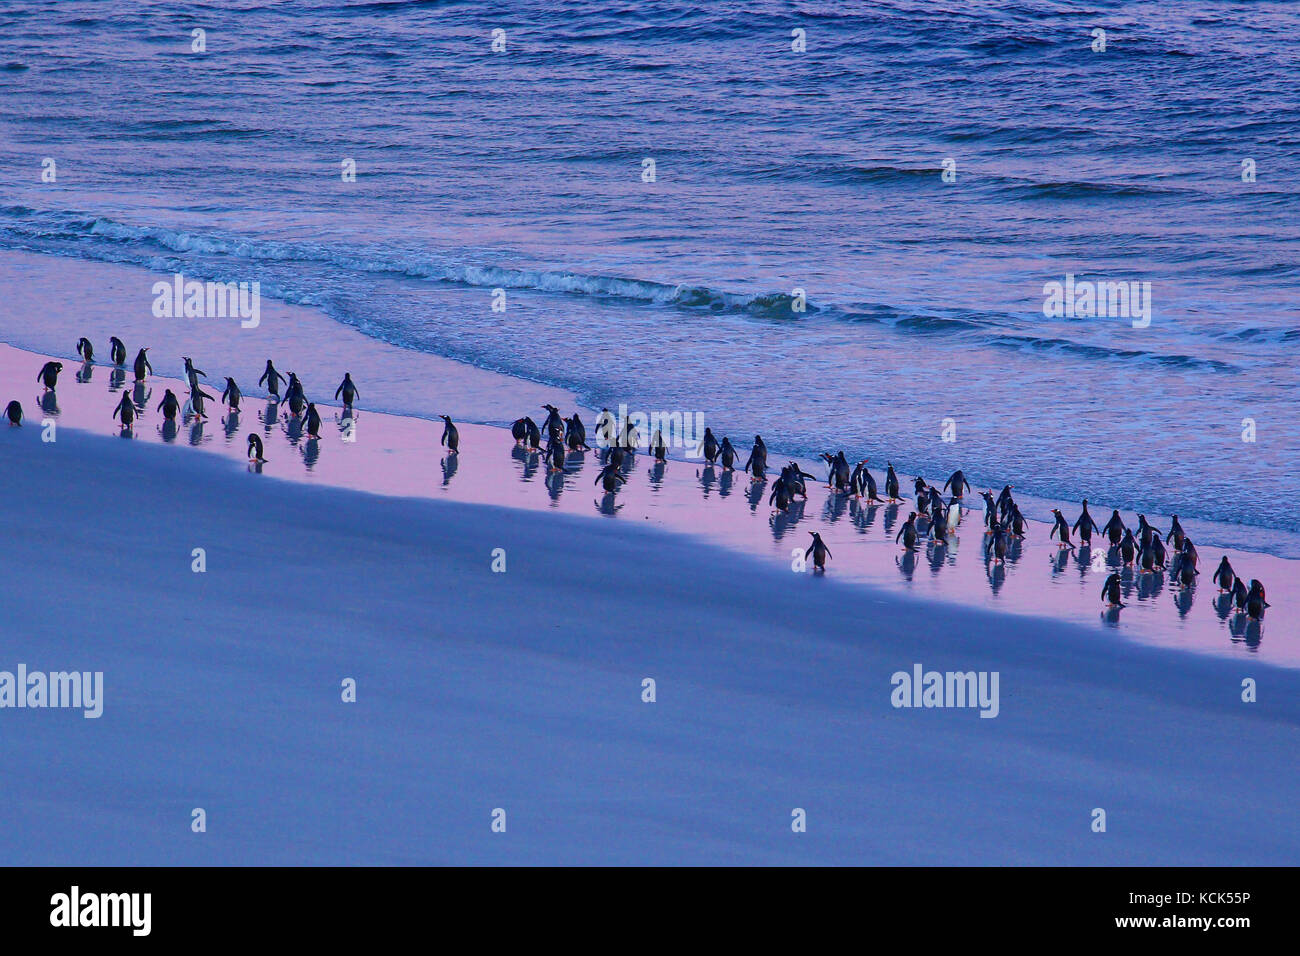 A Large waddle of  Rockhopper Penguins,Eudyptes chrysocome, gathered along a beach in the Falkland Islands, British overseas territory, Stock Photo